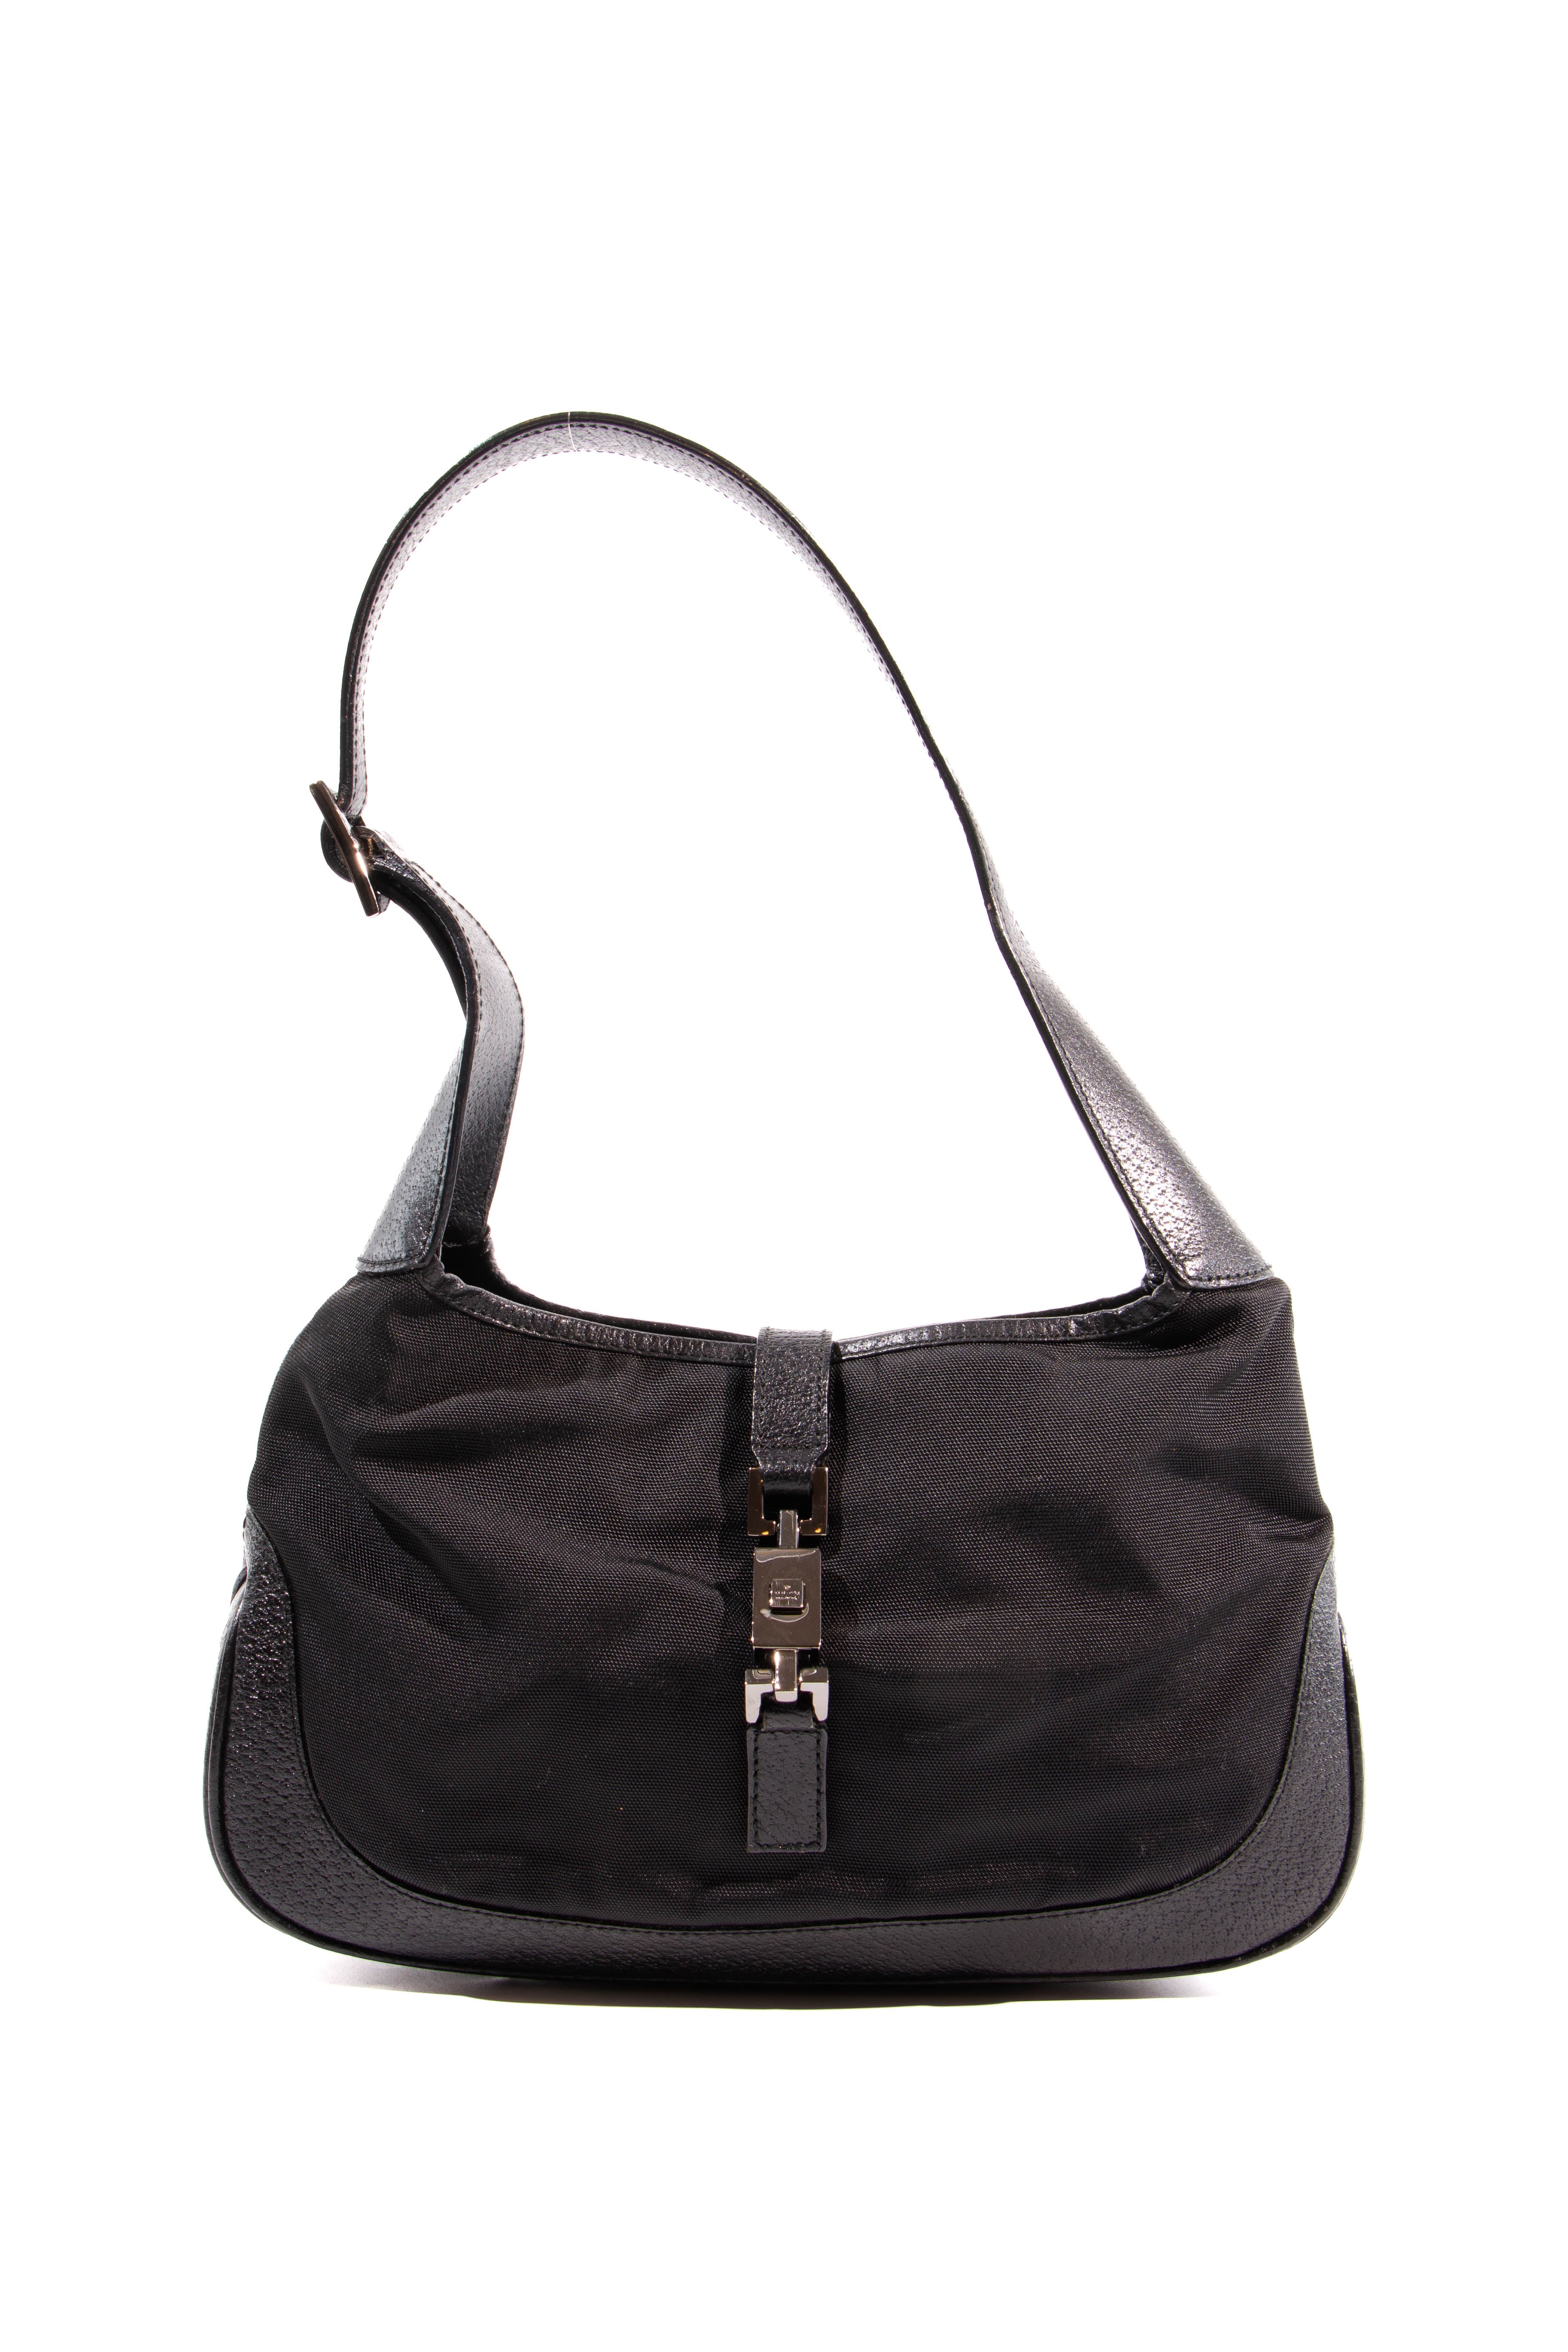 Pu Leather Printed Gucci Ladies Handbags, For Office at Rs 1950/bag in  Mumbai